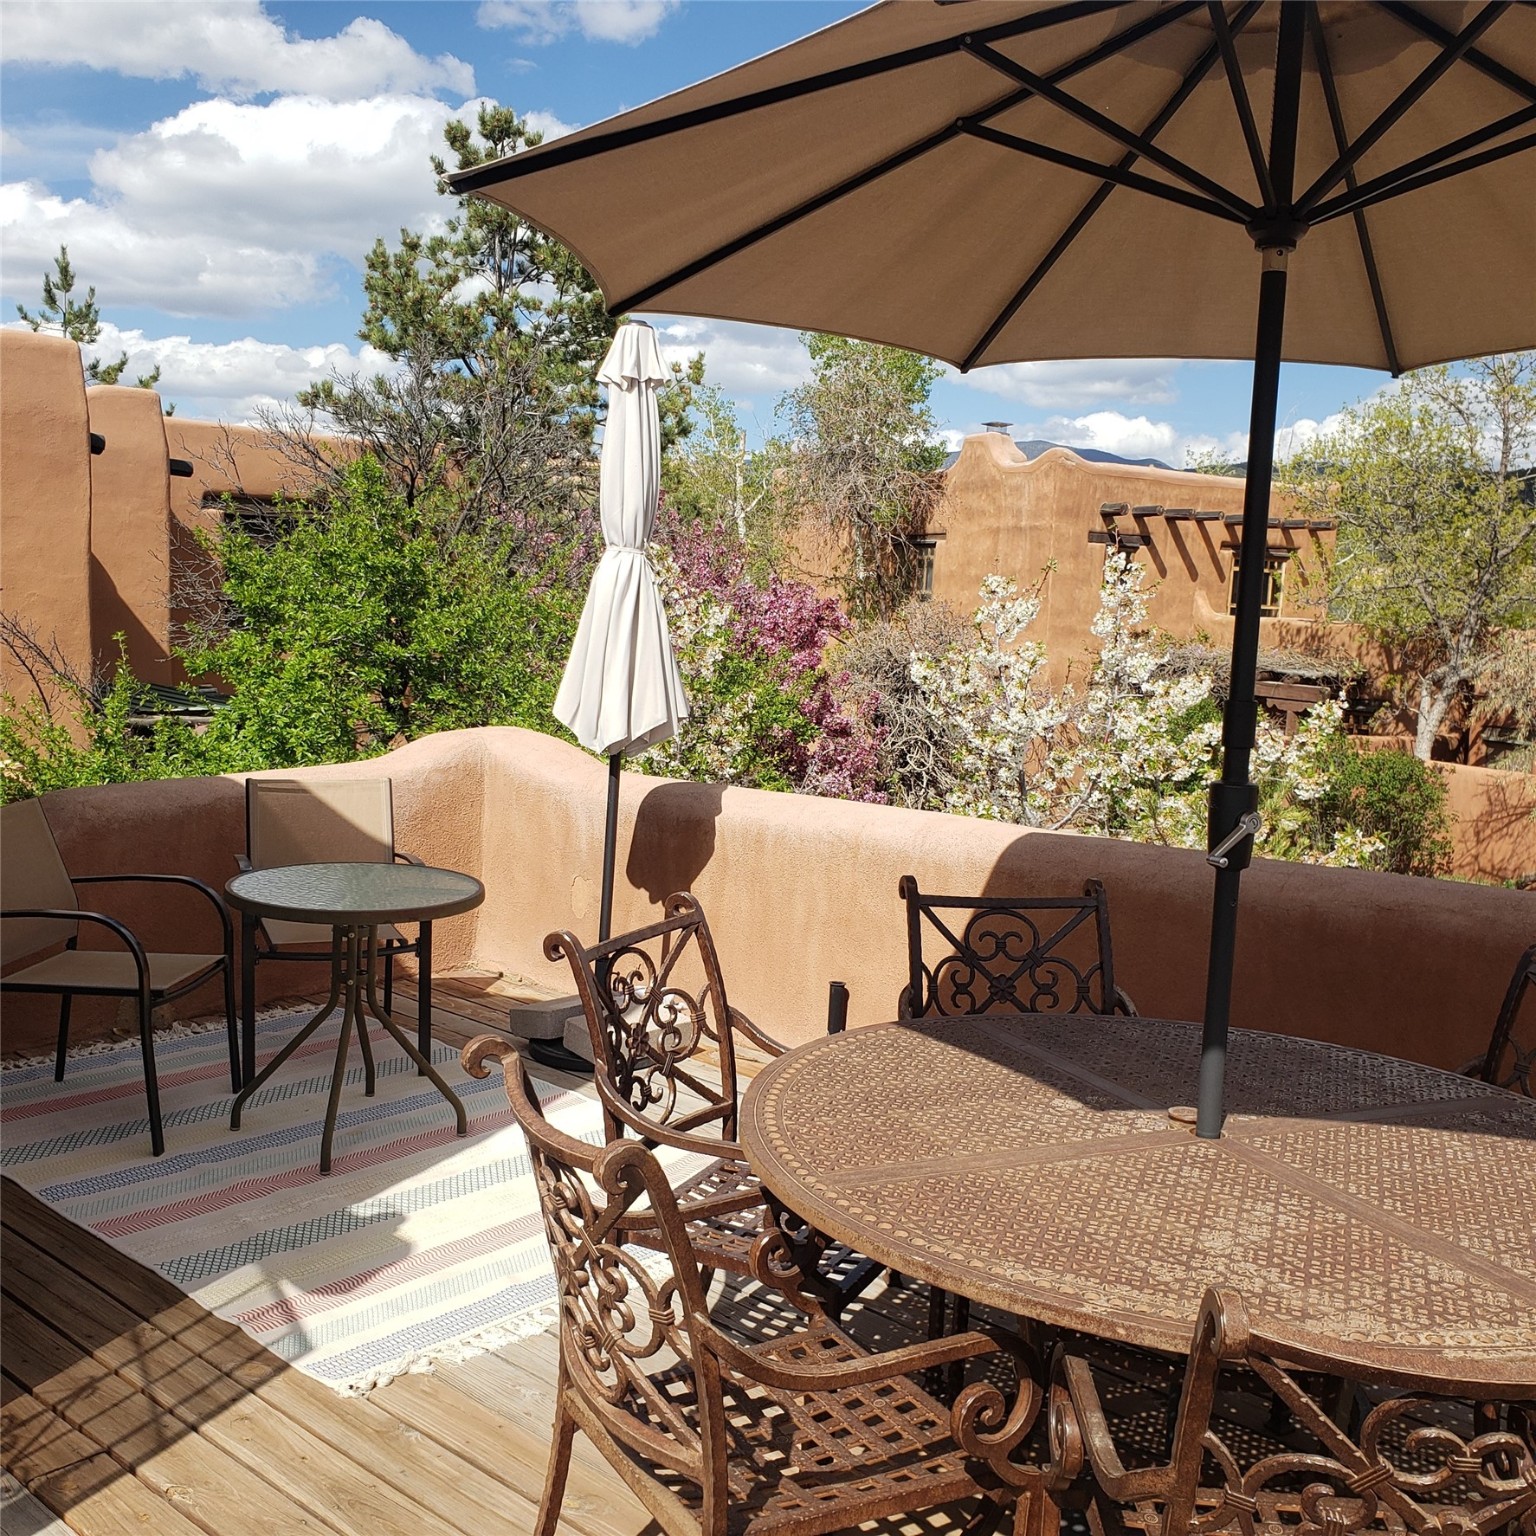 815 E Palace Avenue 21, Santa Fe, New Mexico 87501, 2 Bedrooms Bedrooms, ,2 BathroomsBathrooms,Residential,For Sale,815 E Palace Avenue 21,202400431